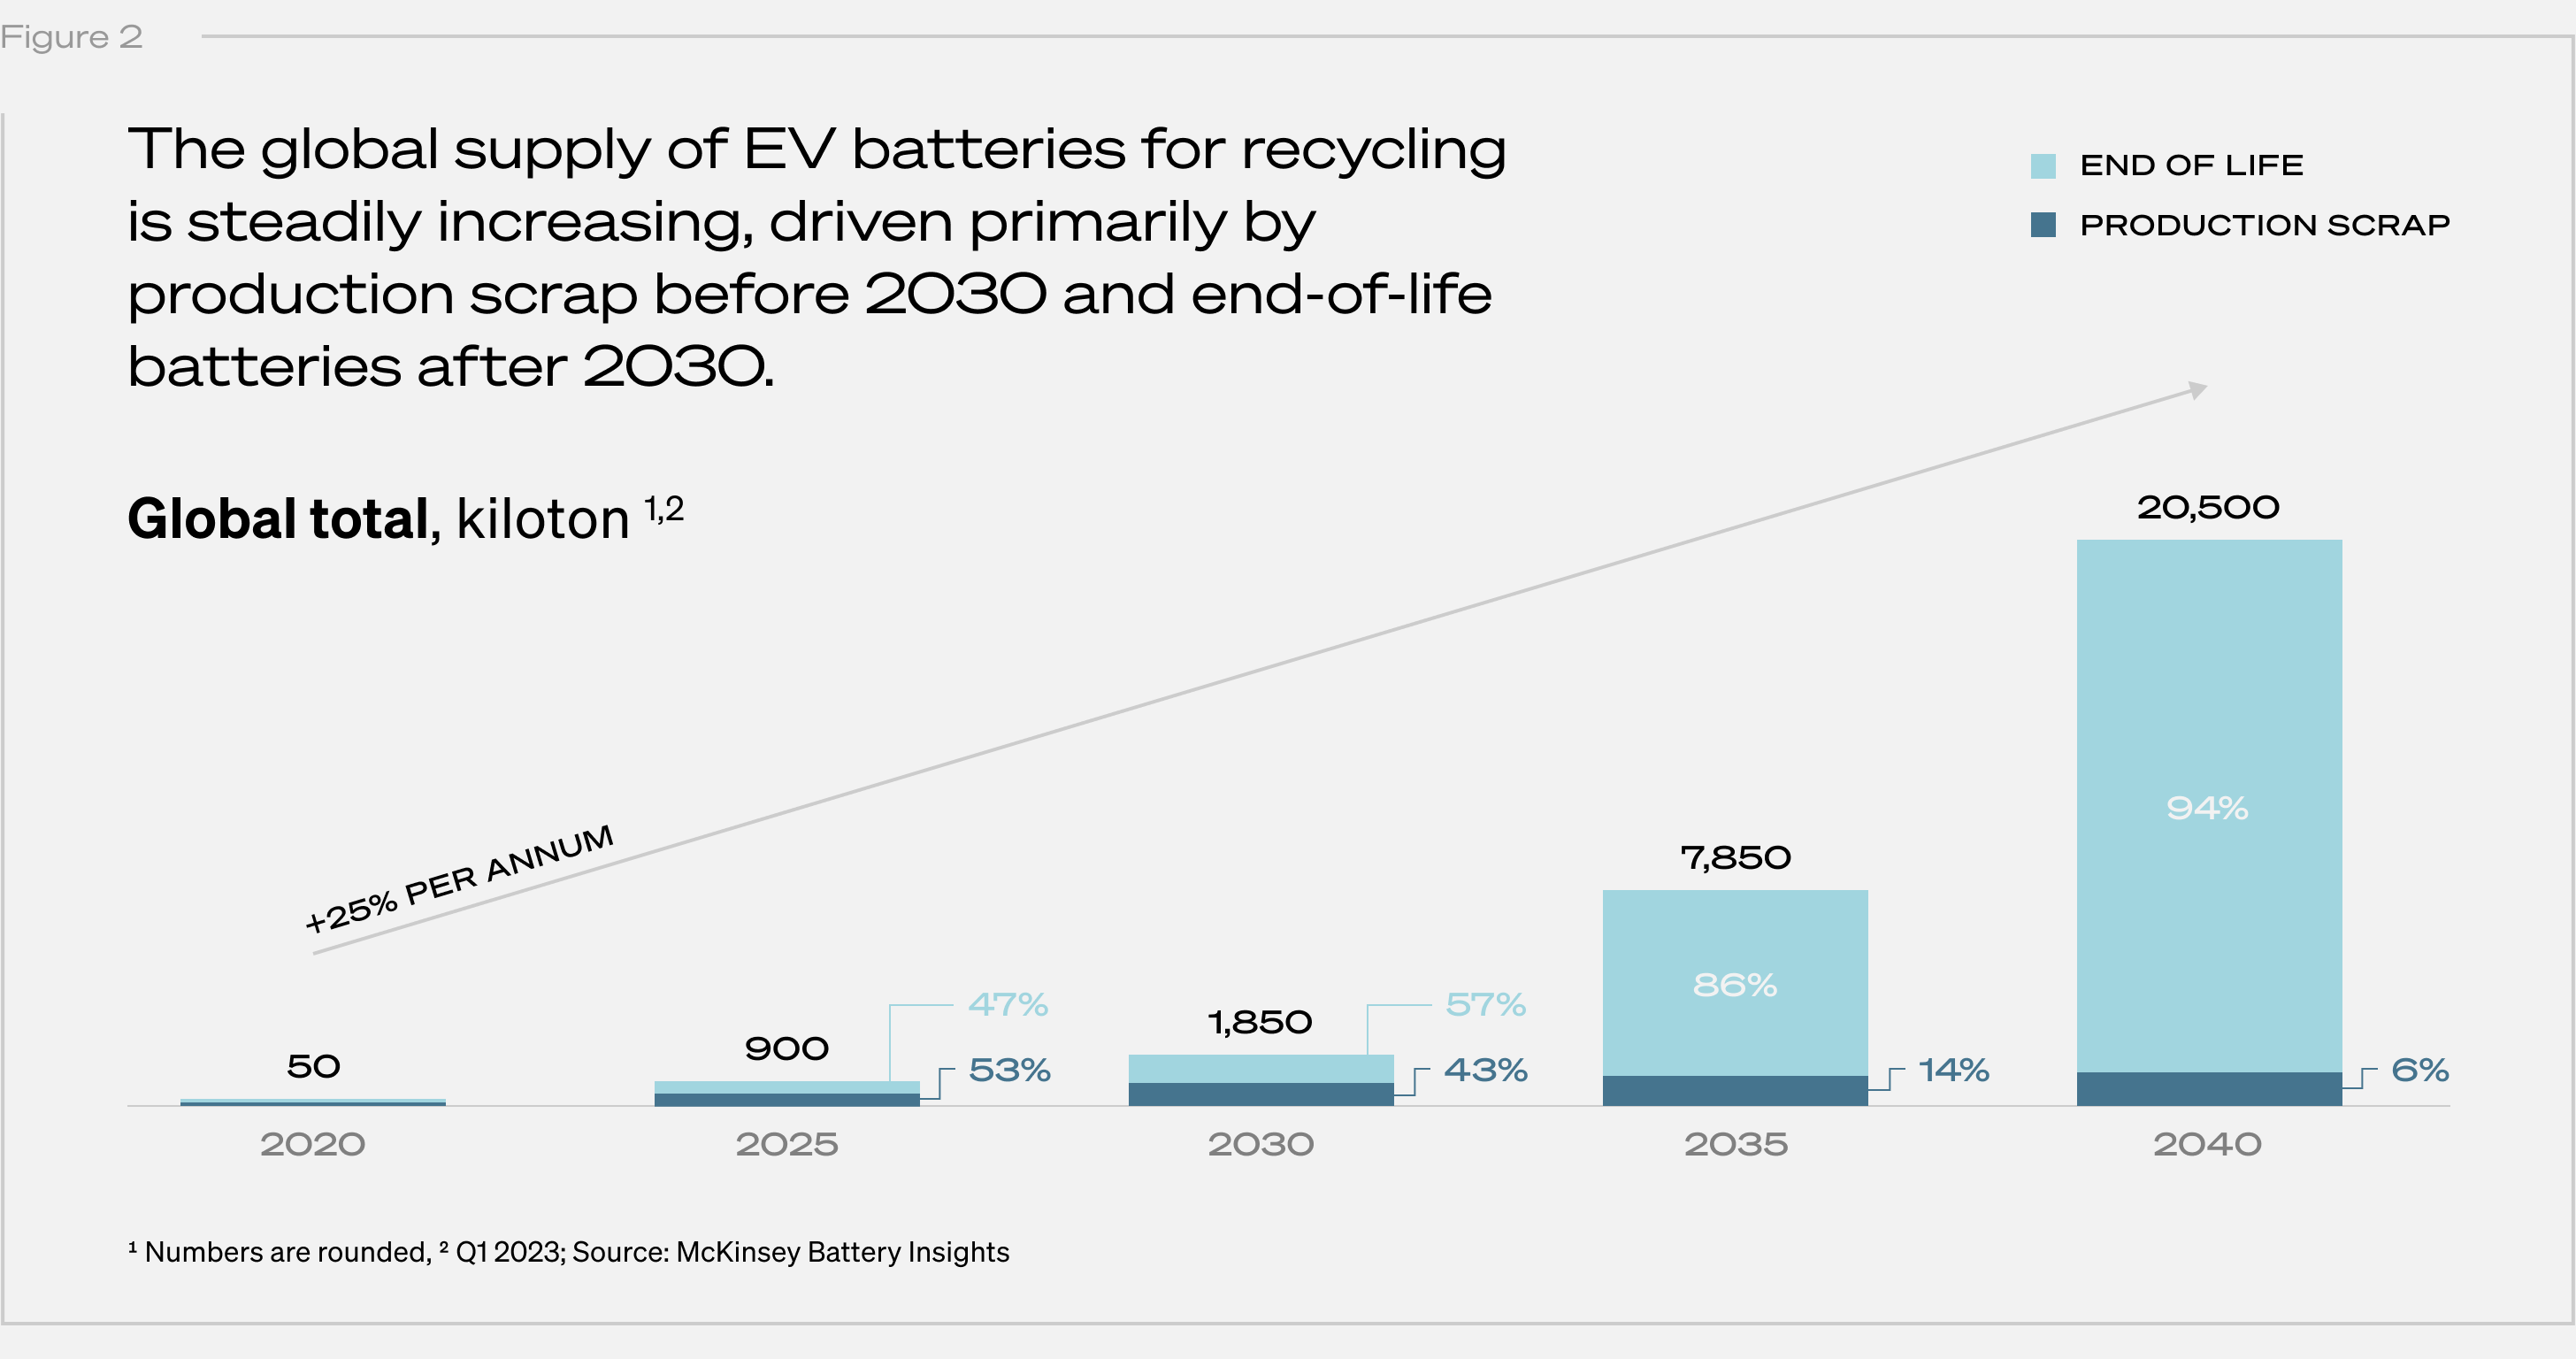 Chart of the global supply of EV batteries for recycling in kilotons